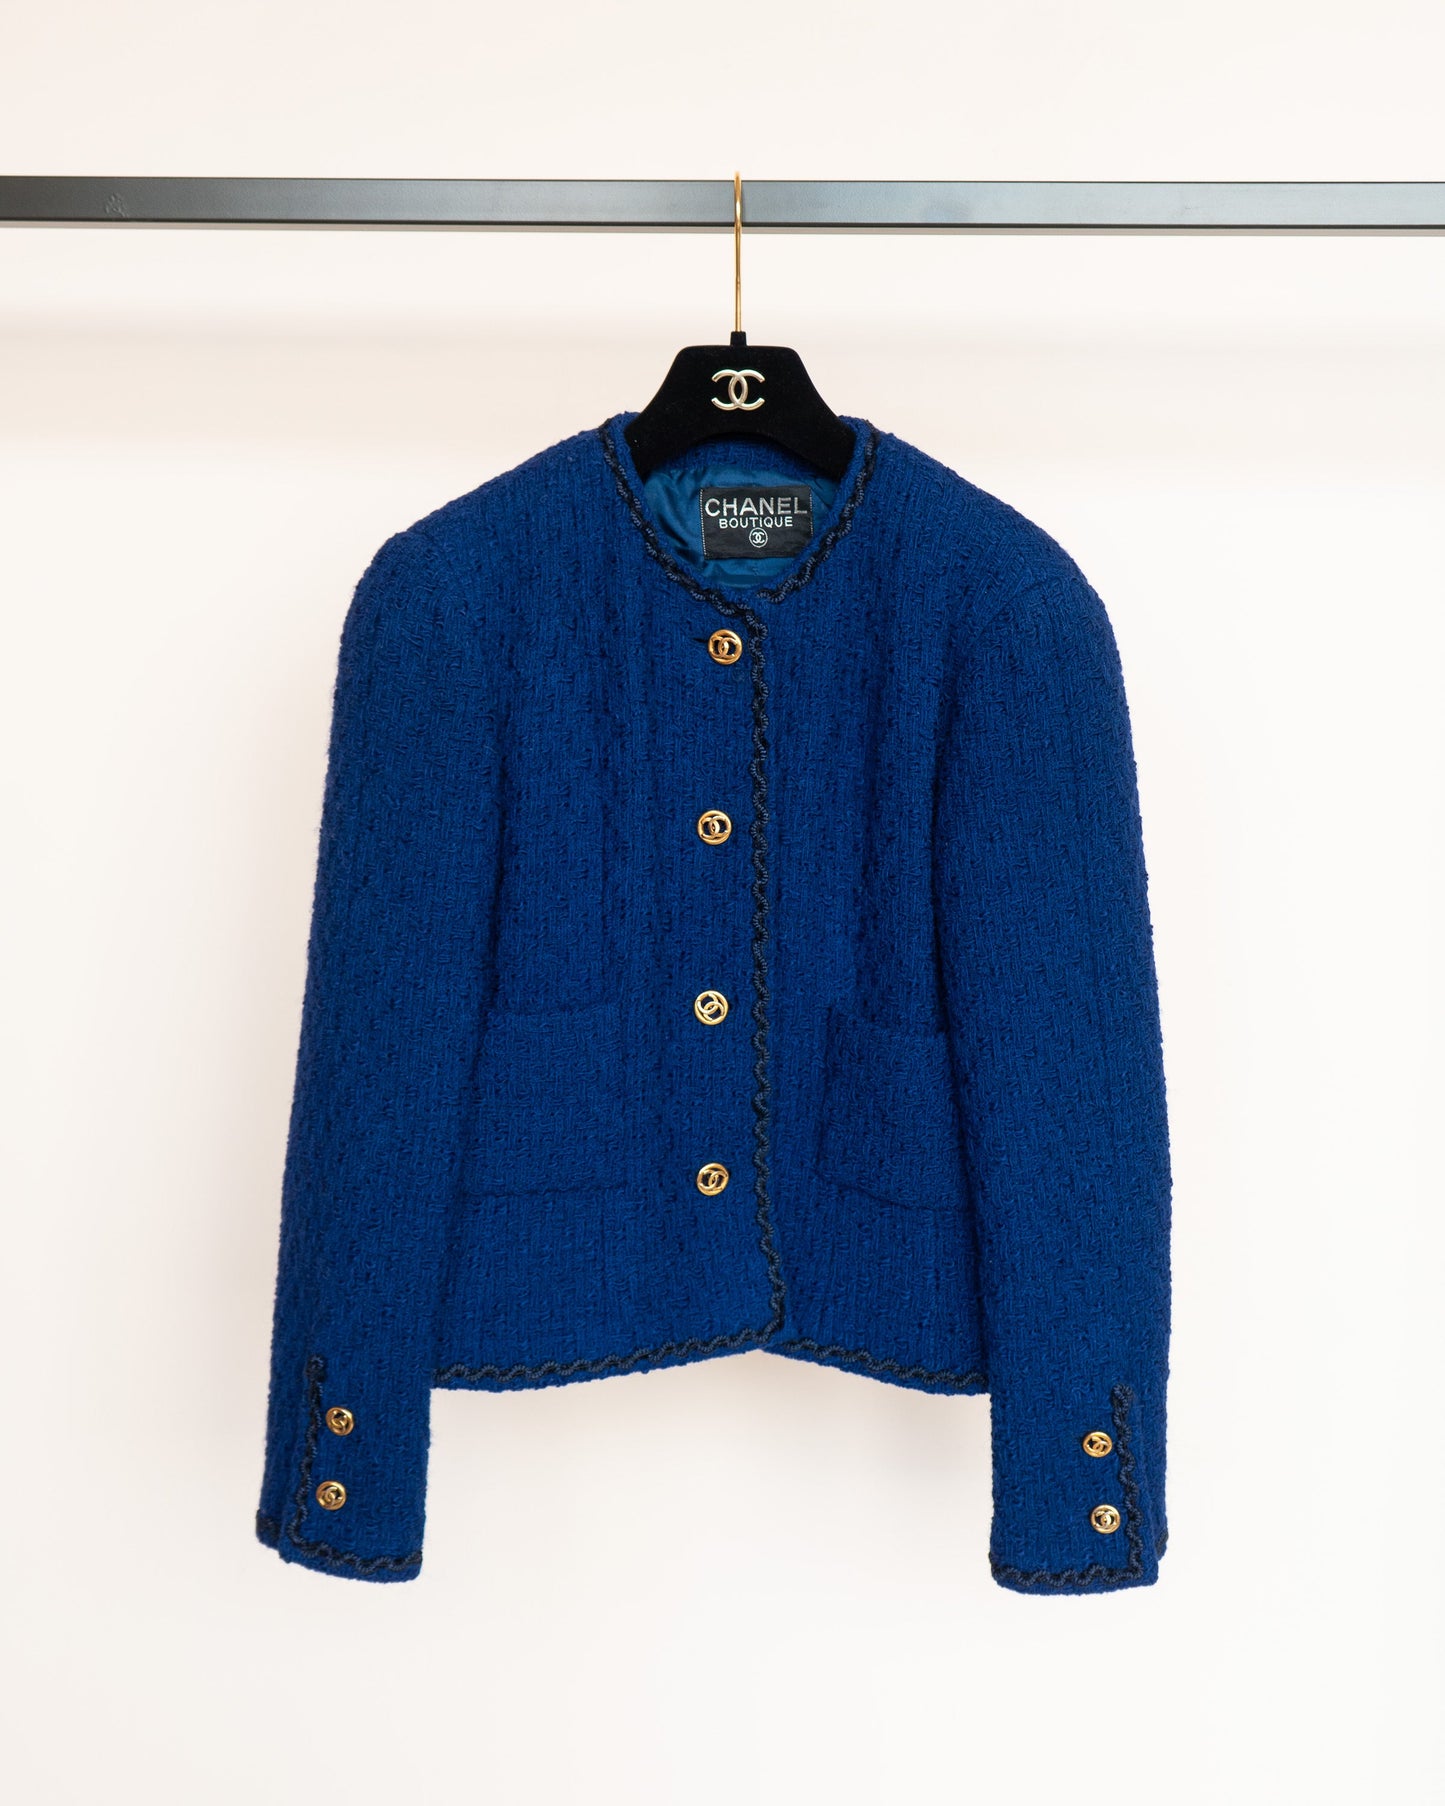 FR38-40 Chanel Early 1980s Two-Pocketed Collarless Tweed Jacket in Royal Blue